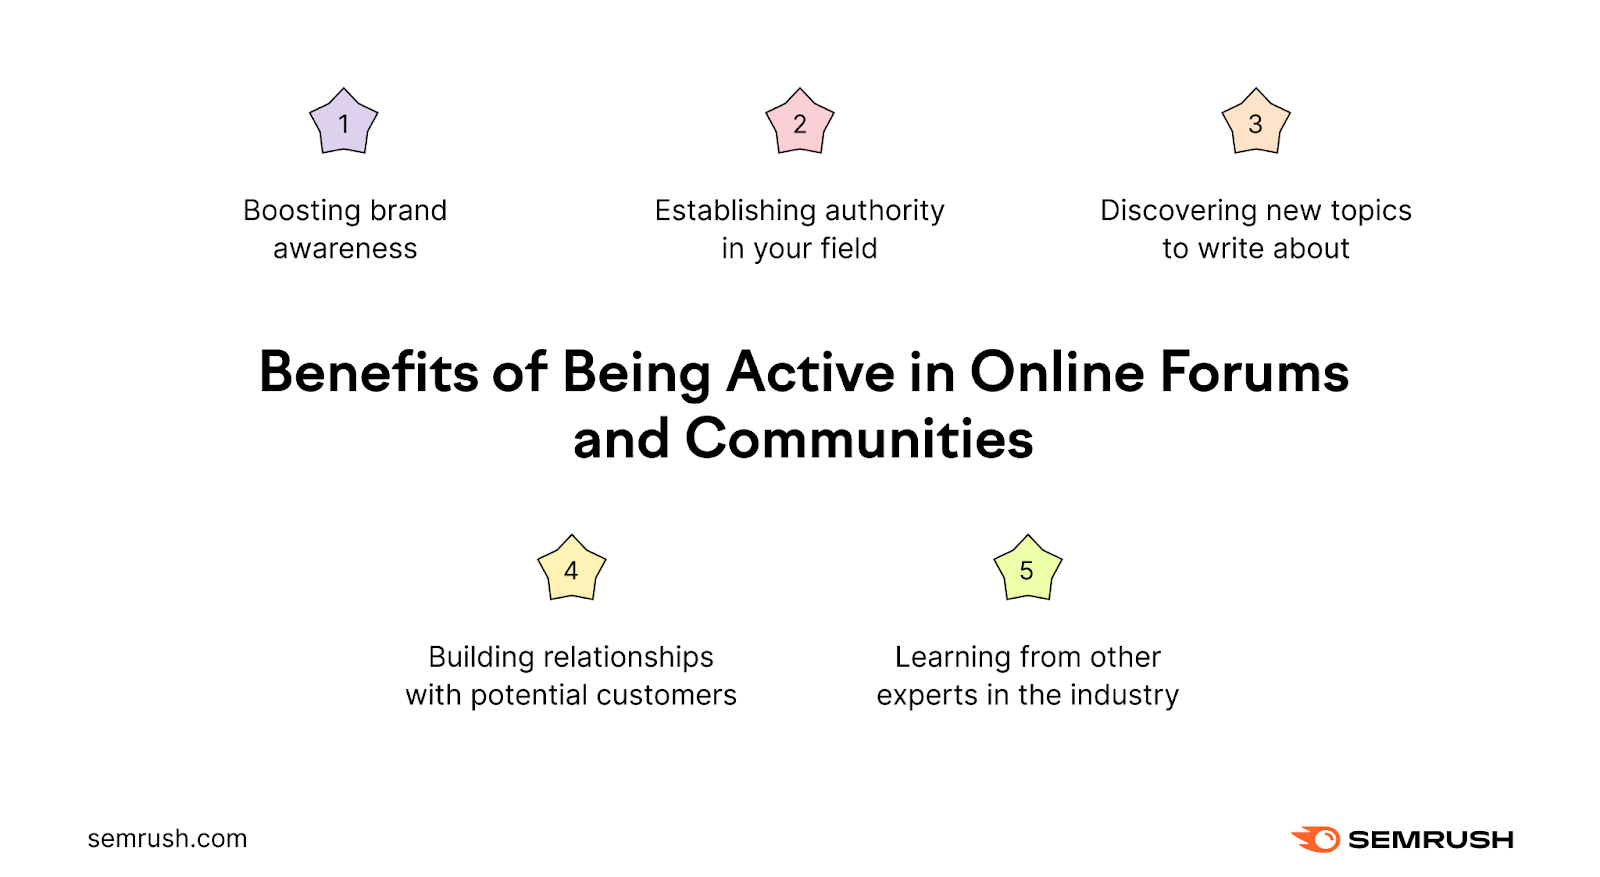 Benefits of being active in online fo،s and communities are boosting ،nd awareness, establi،ng aut،rity in your field, discovering new topics to write about, building relation،ps with ،ential customers, learning from other experts in the industry.